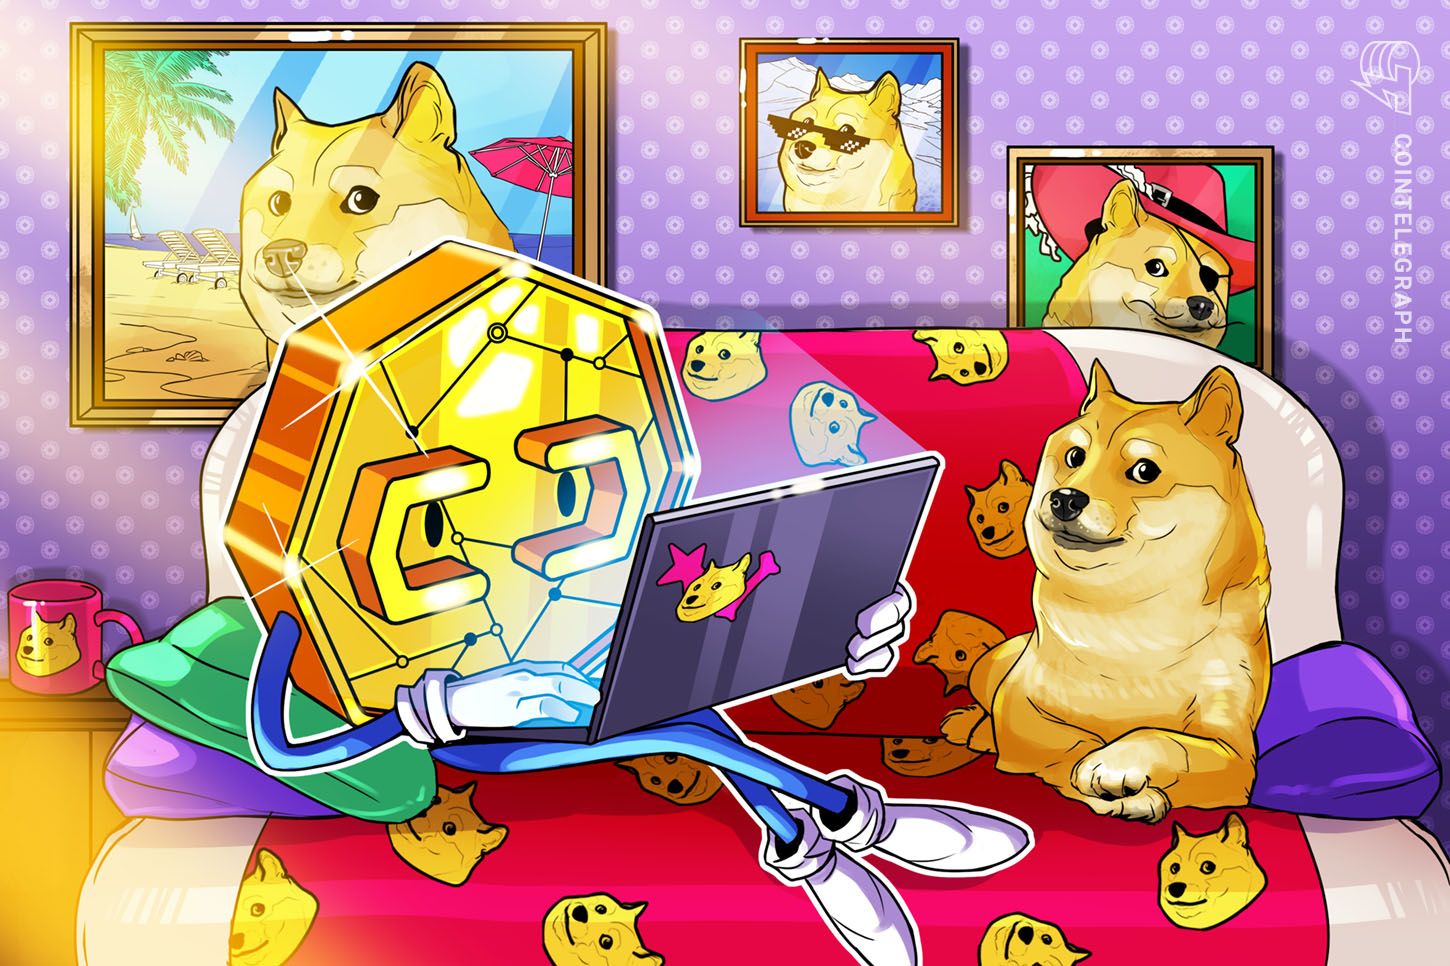 The largest winner of Bitcoin’s rally? Dogecoin. DOGE worth soars 105% in a single week